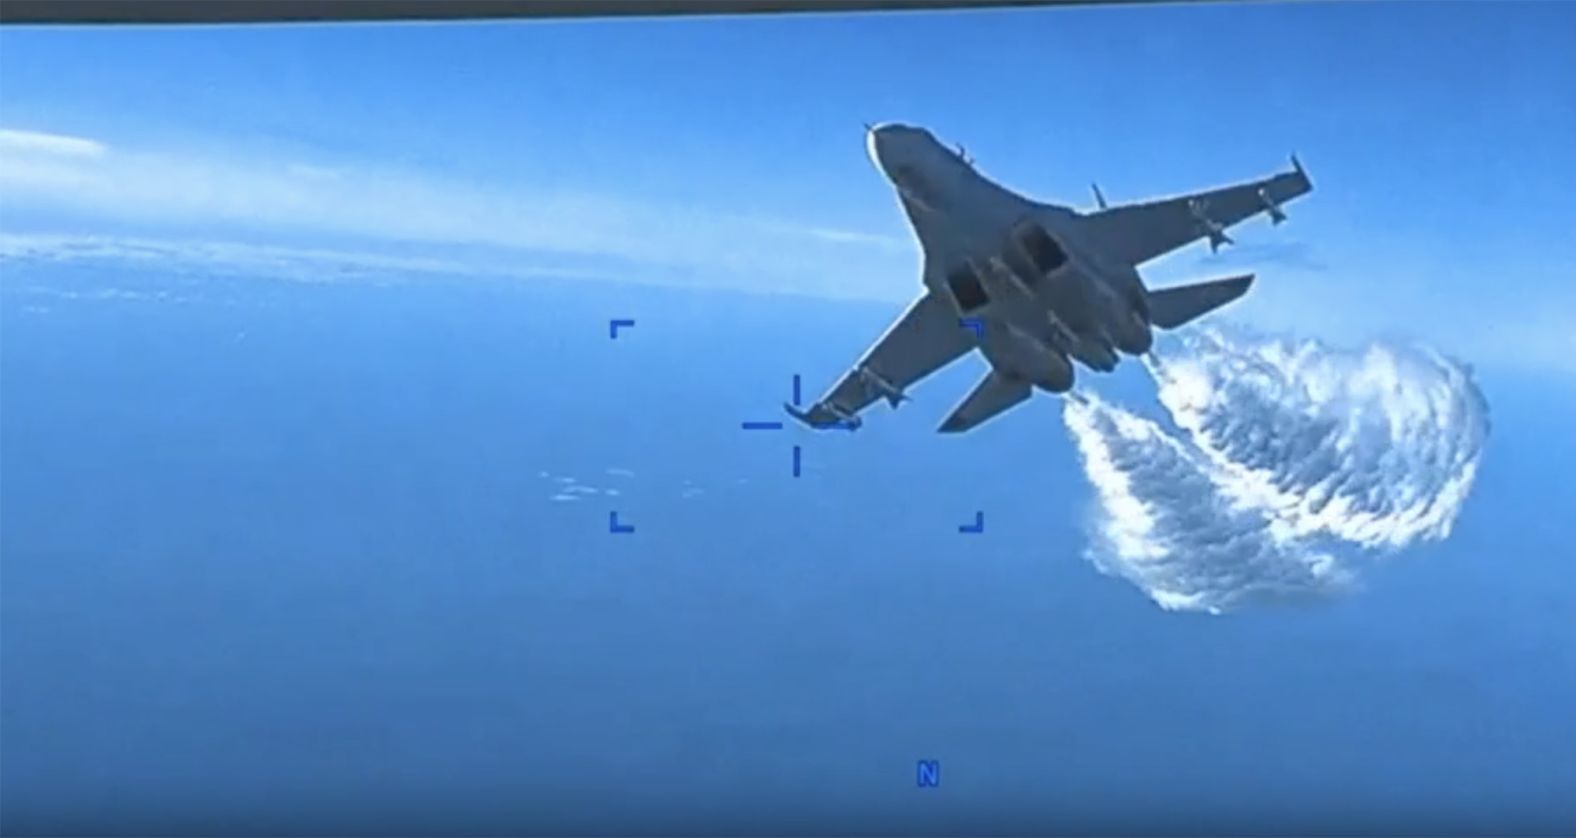 A still taken from video footage released by the US European Command shows an <a href="index.php?page=&url=https%3A%2F%2Fwww.cnn.com%2F2023%2F03%2F14%2Fpolitics%2Fus-drone-russian-jet-black-sea" target="_blank">encounter</a> between a US surveillance drone and Russian fighter jets over the Black Sea on Tuesday, March 14. The MQ-9 Reaper drone and two Russian Su-27 aircraft were flying over international waters when one of the Russian jets intentionally flew in front of and dumped fuel on the unmanned drone several times, a statement from US European Command said. The aircraft then hit the propeller of the drone, prompting US forces to bring the drone down in the Black Sea.